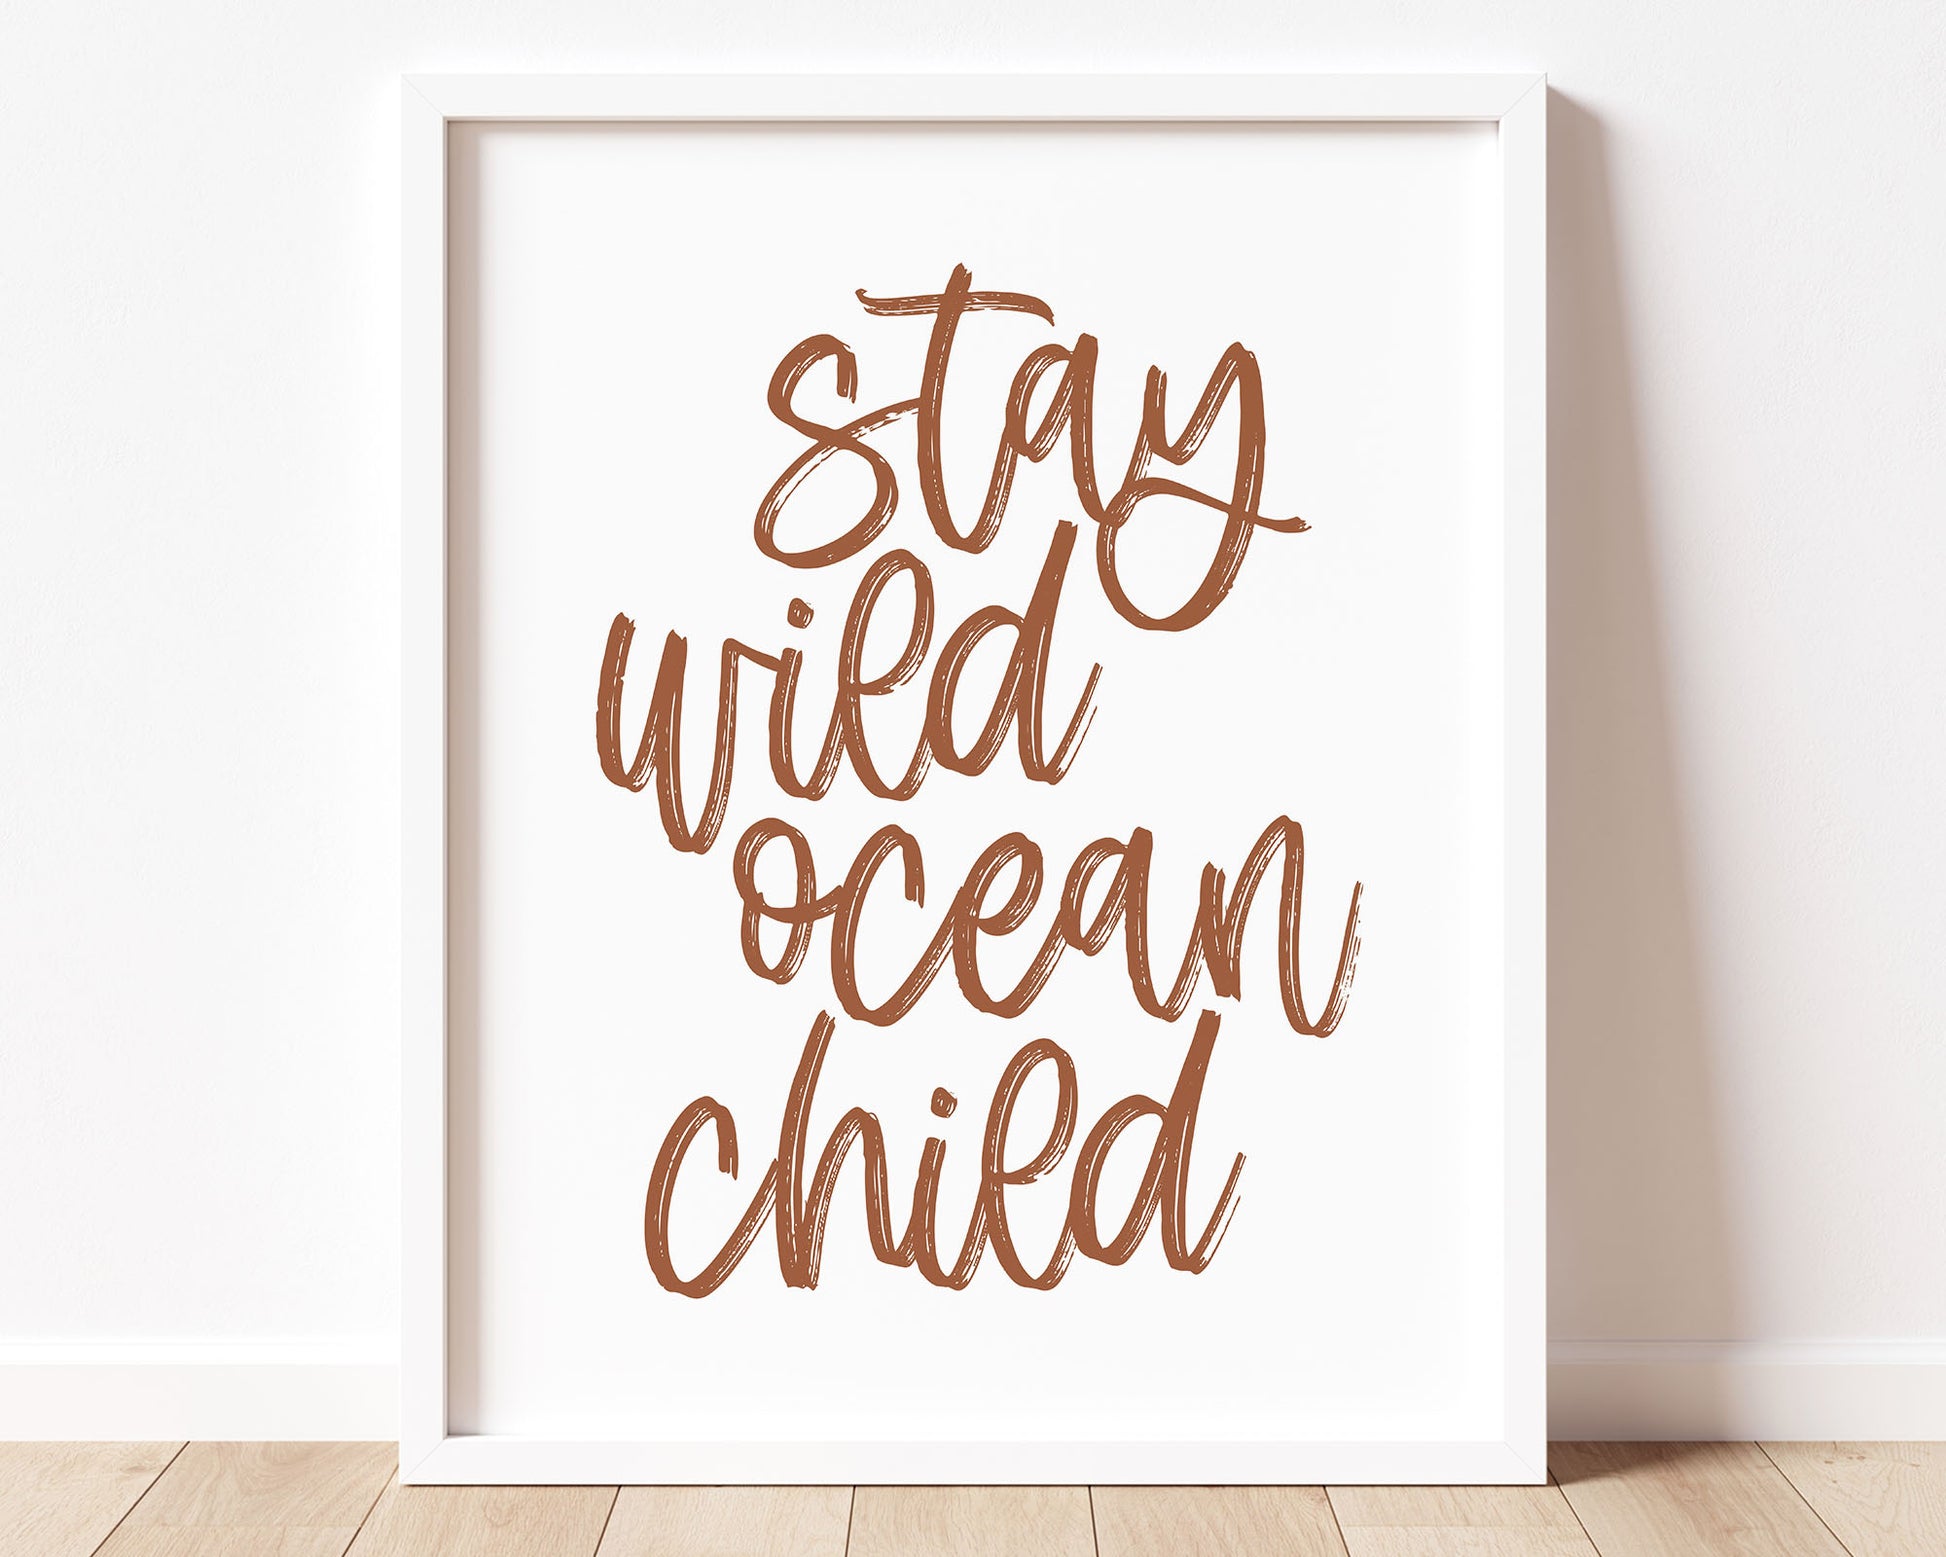 Neutral Tan Stay Wild Ocean Child Printable Wall Art featuring a textured brush style cursive lettered quote in a rusty, earth toned clay terracotta color.